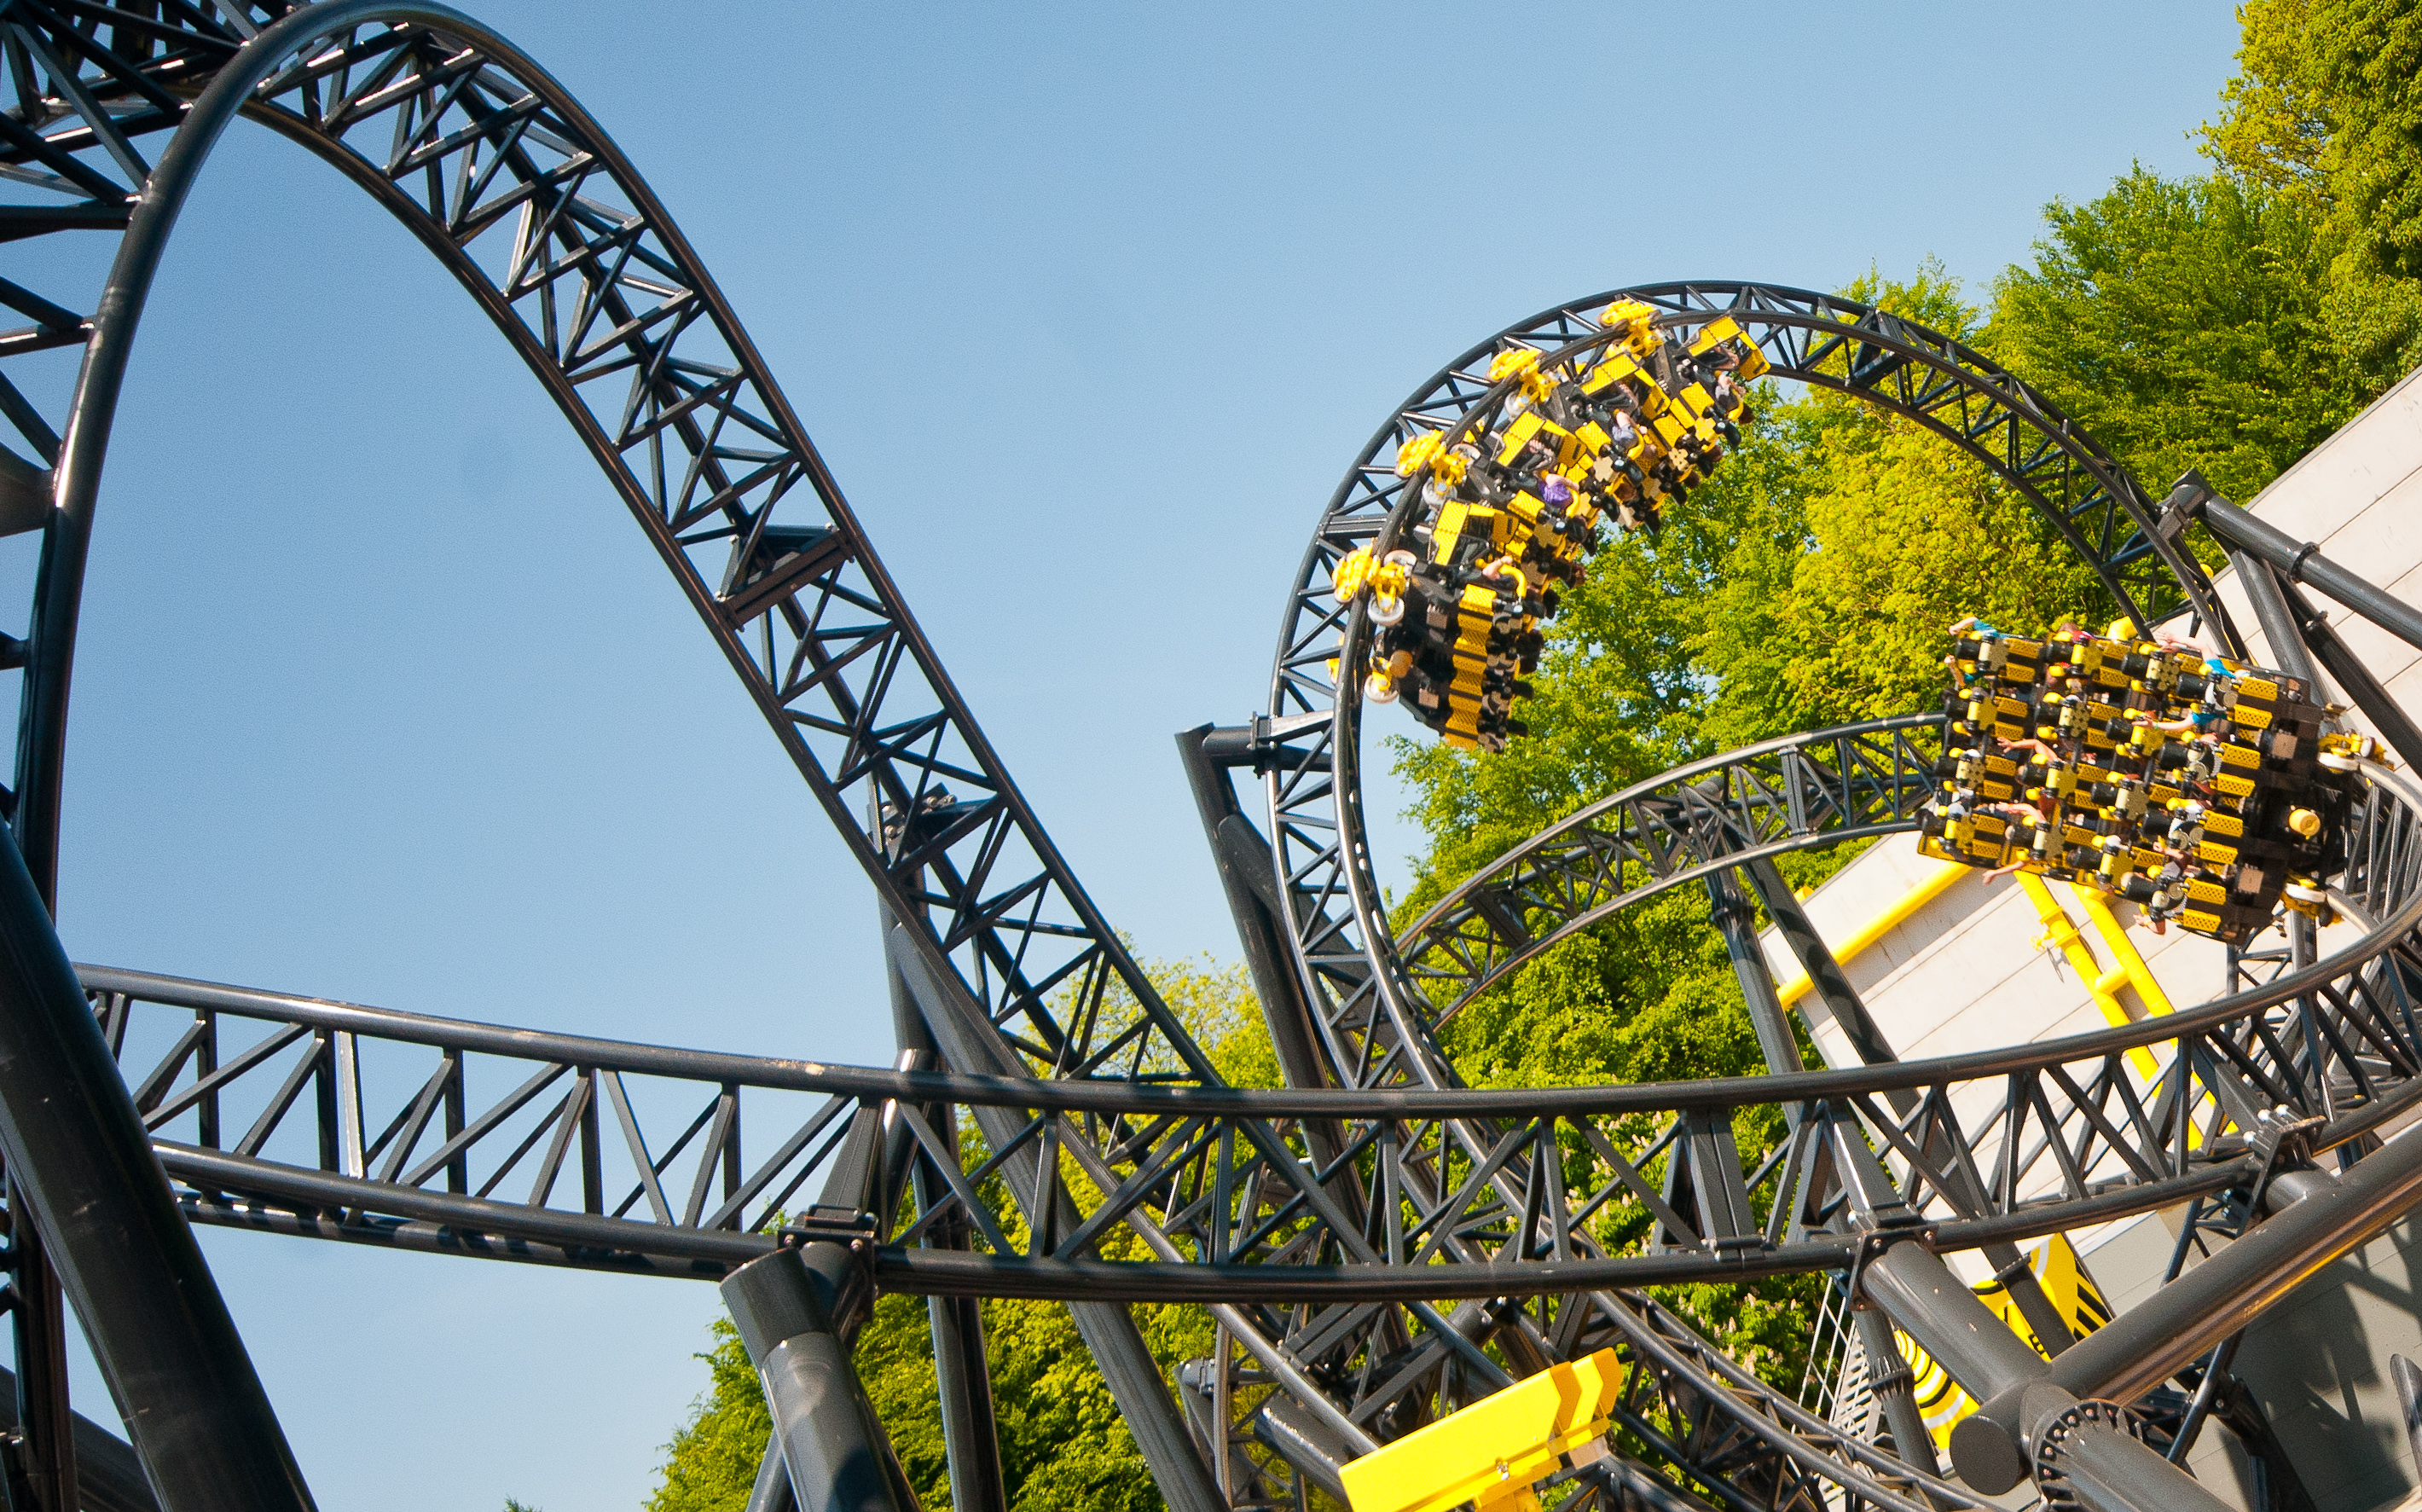 Two trains from The Smiler upside down at Alton Towers Theme Park